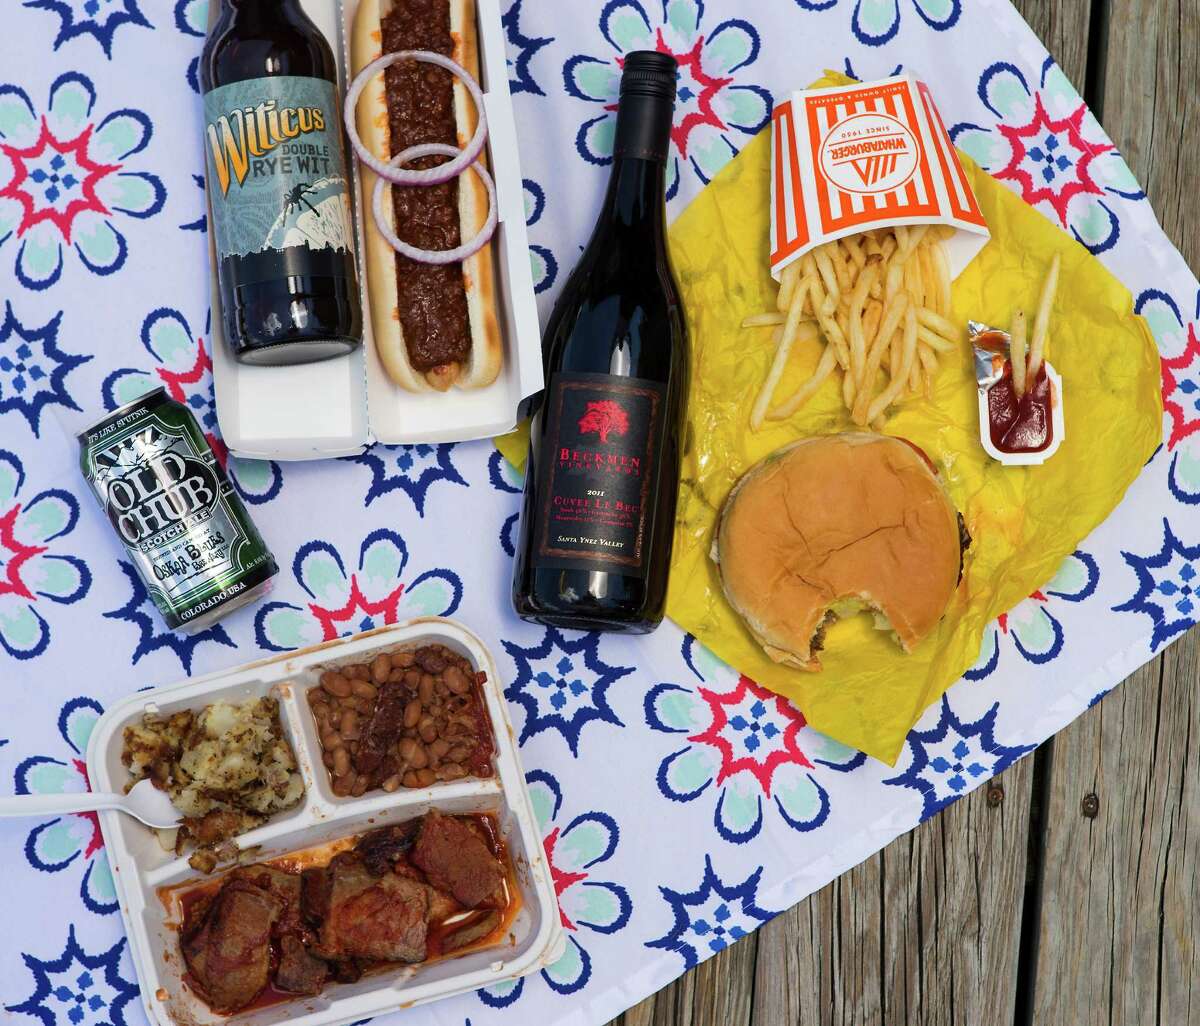 Pair your fast food with some classy wines and beers.